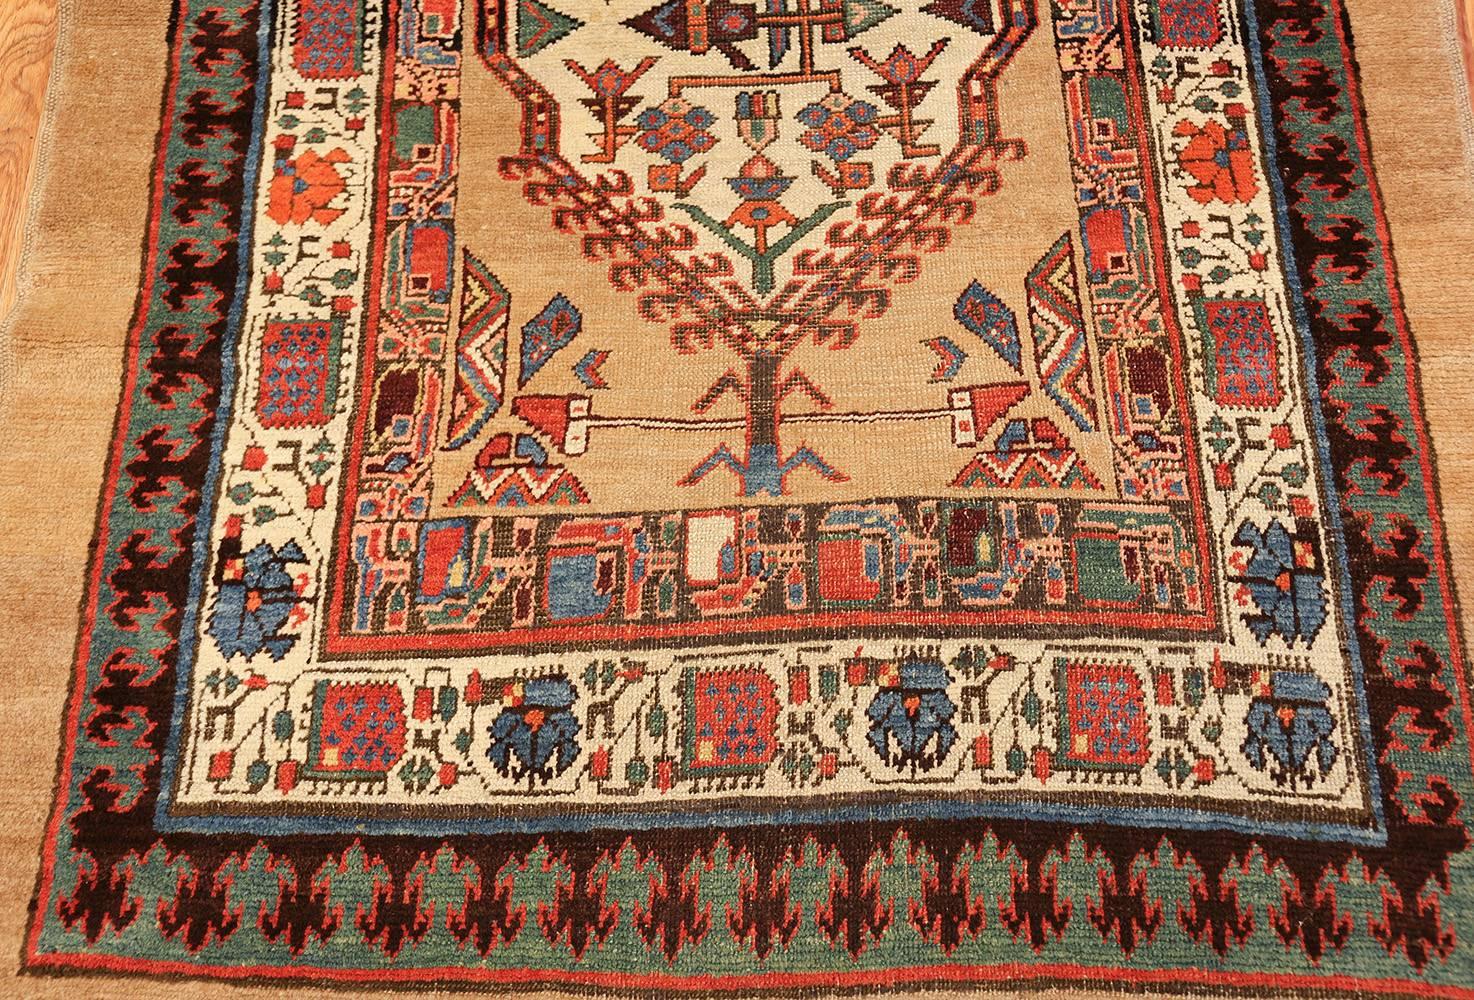 Wool Antique Persian Serab Runner Rug. Size: 4 ft x 12 ft 10 in (1.22 m x 3.91 m)